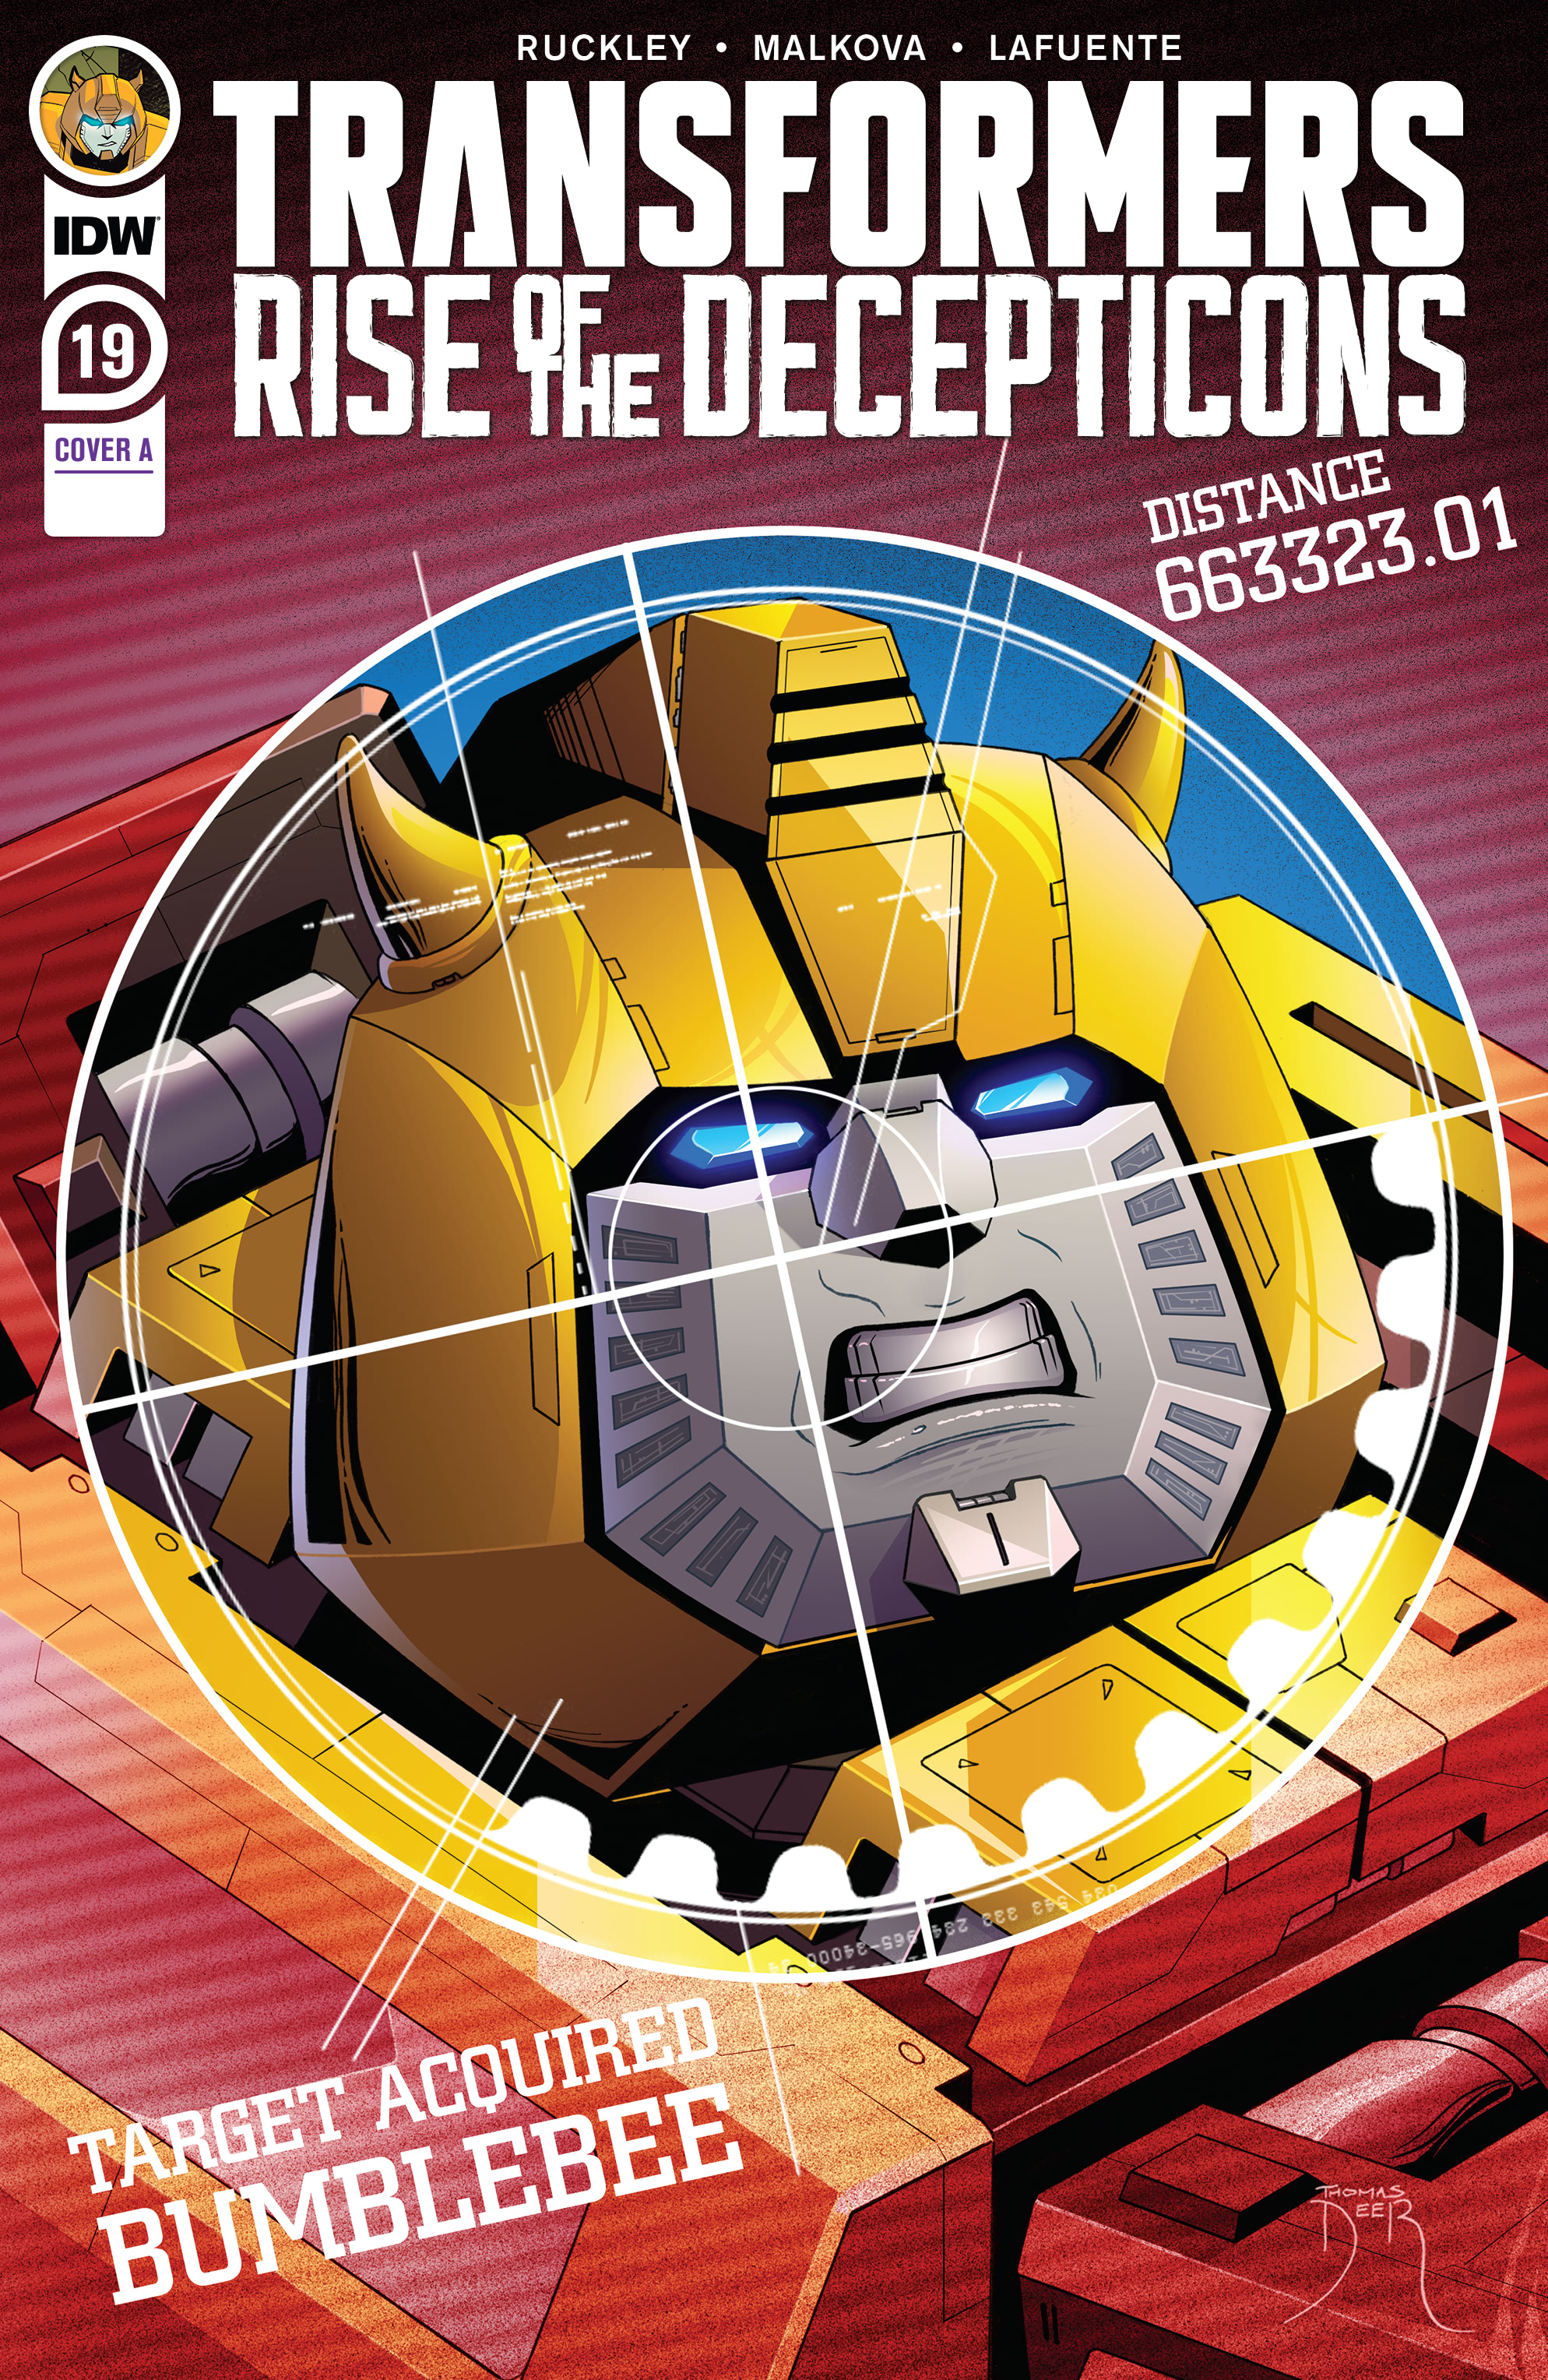 Transformers (2019-): Chapter 19 - Page 1